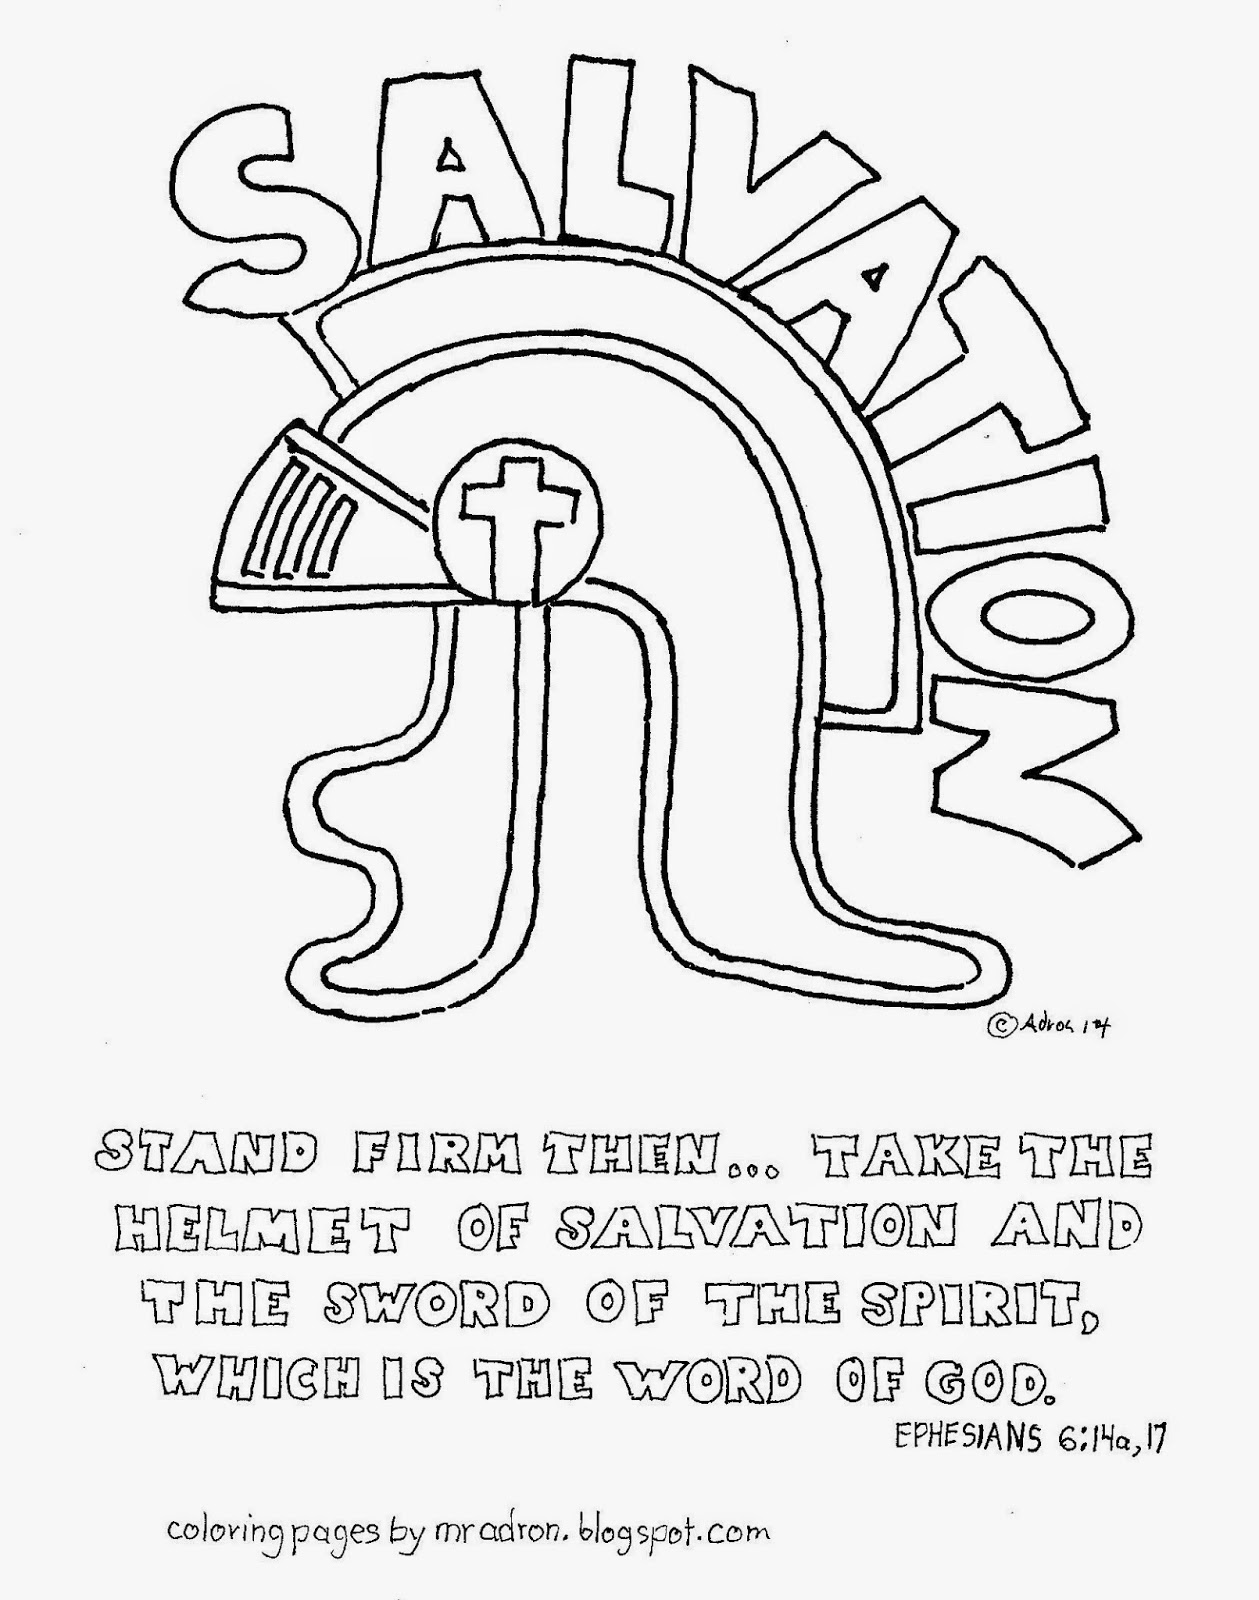 Helmet of Salvation Coloring Pages for Kids Image